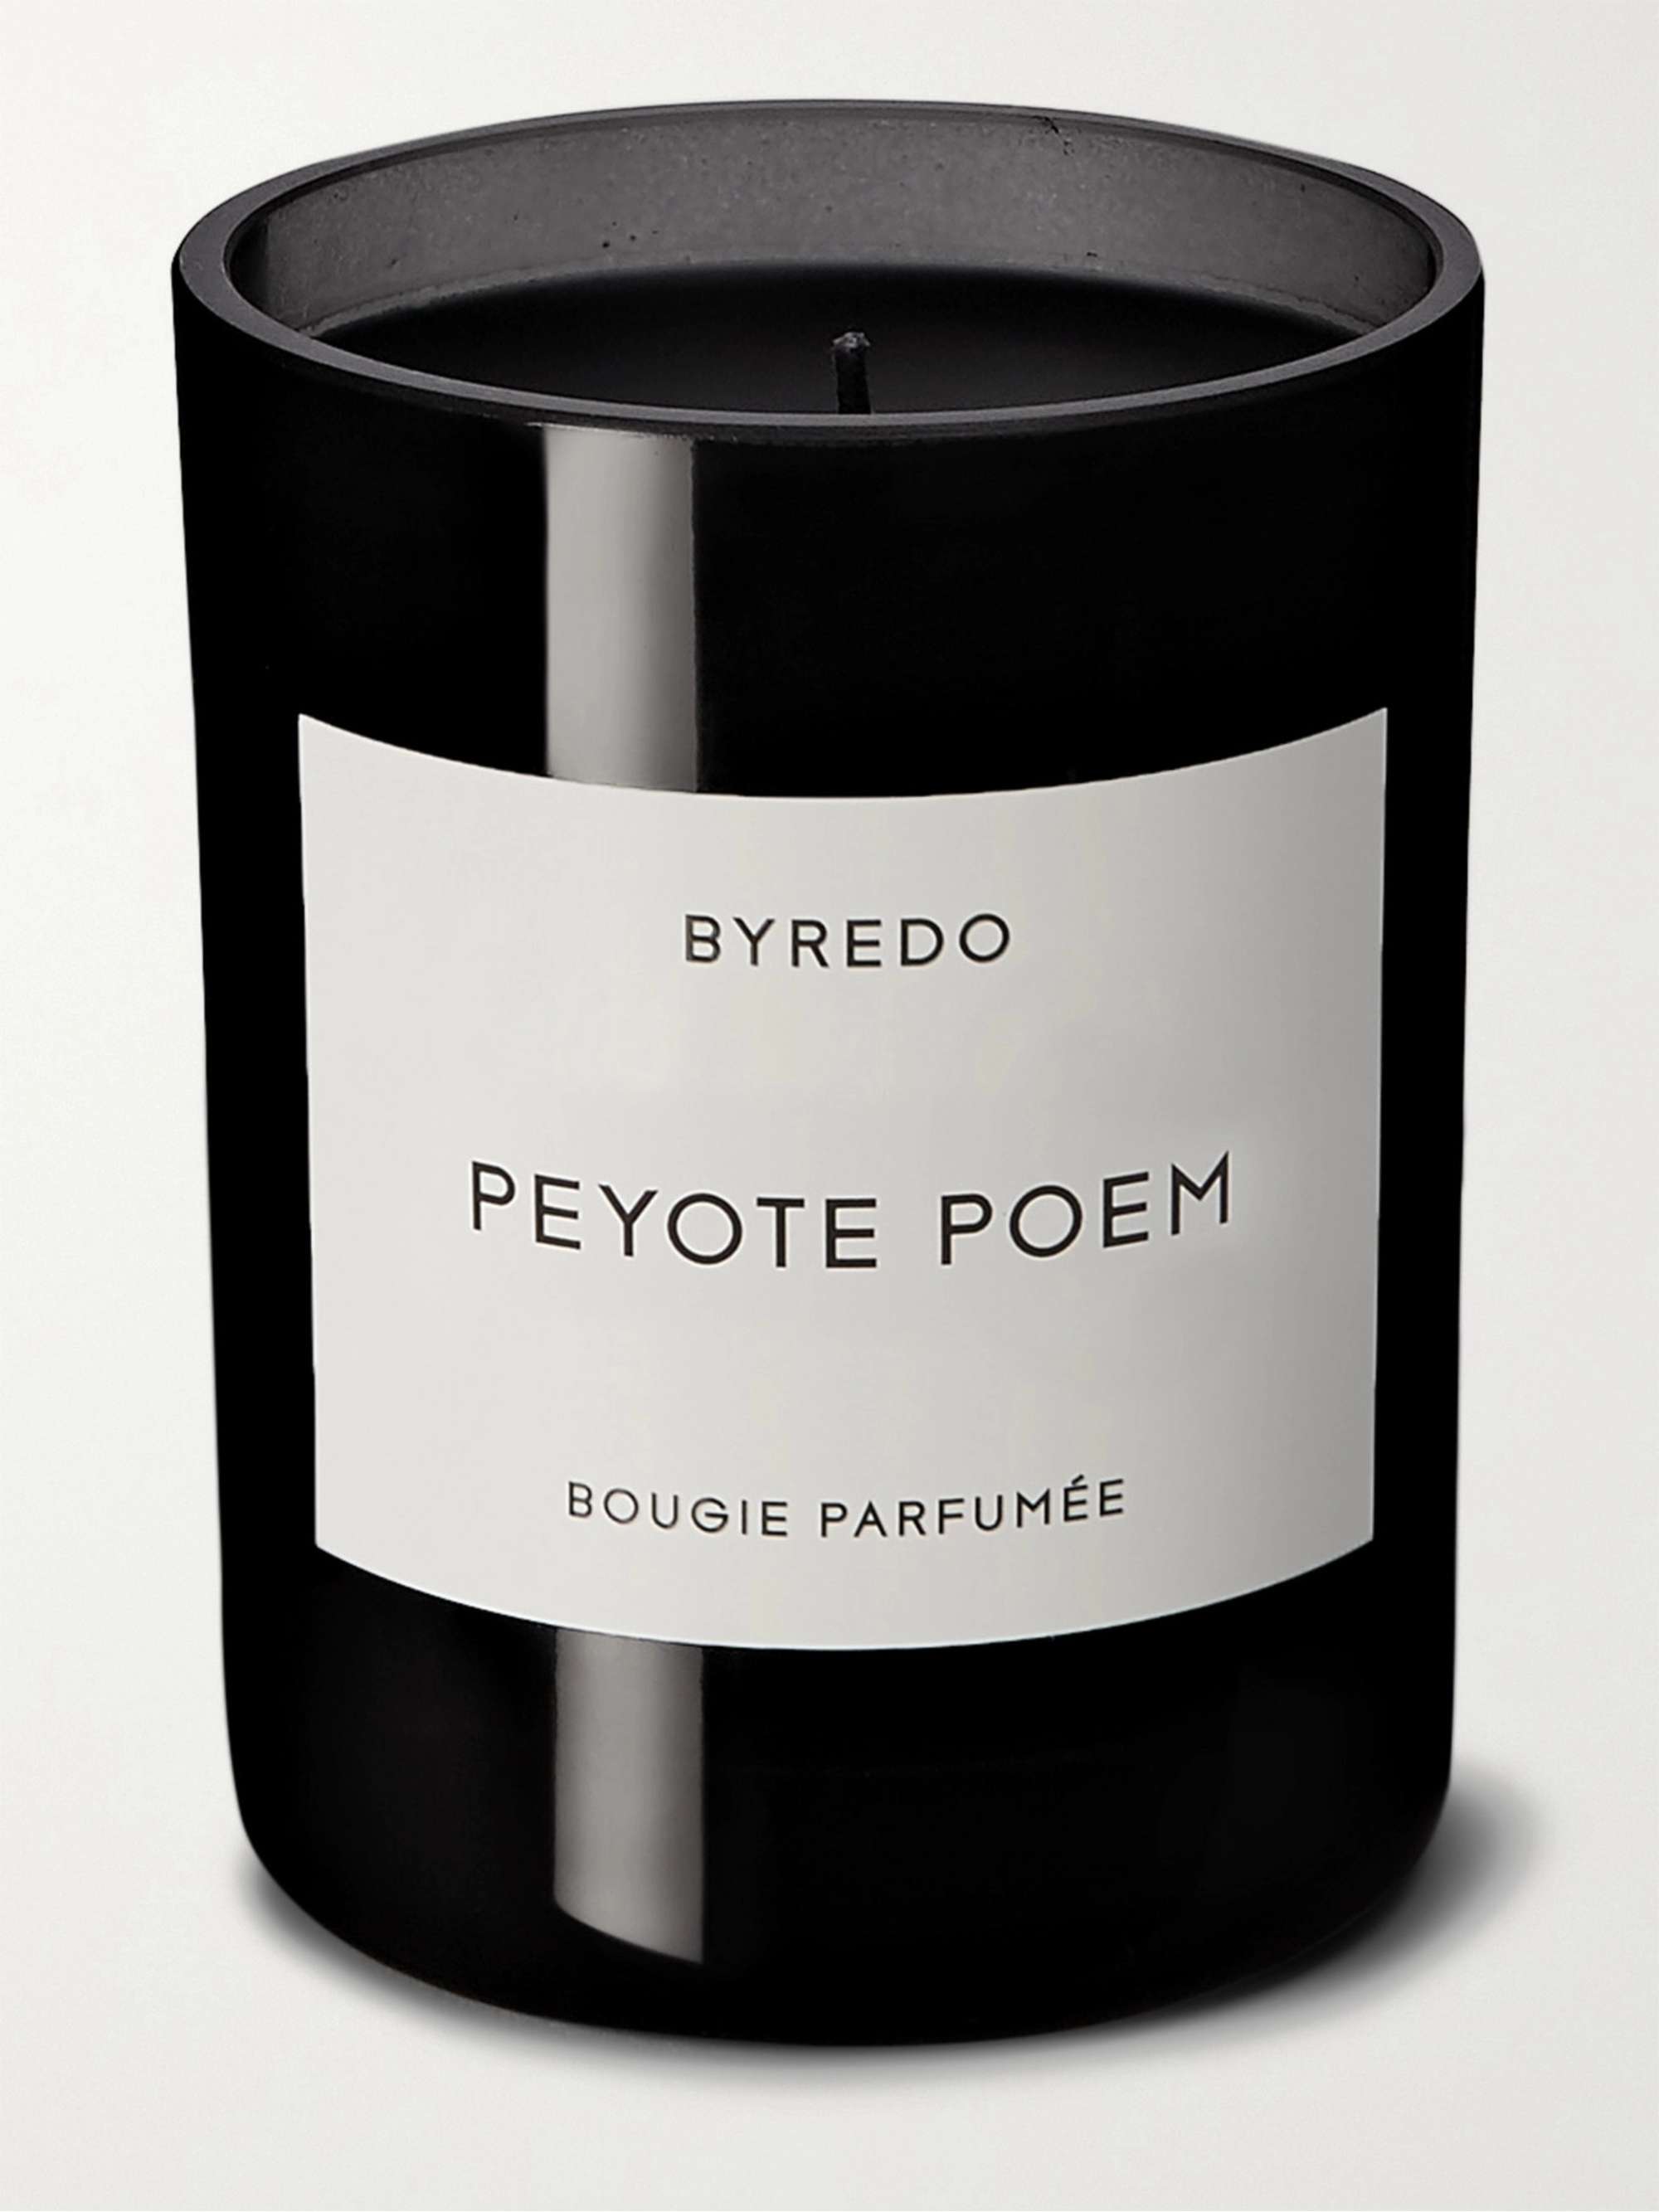 BYREDO Peyote Poem Scented Candle, 240g